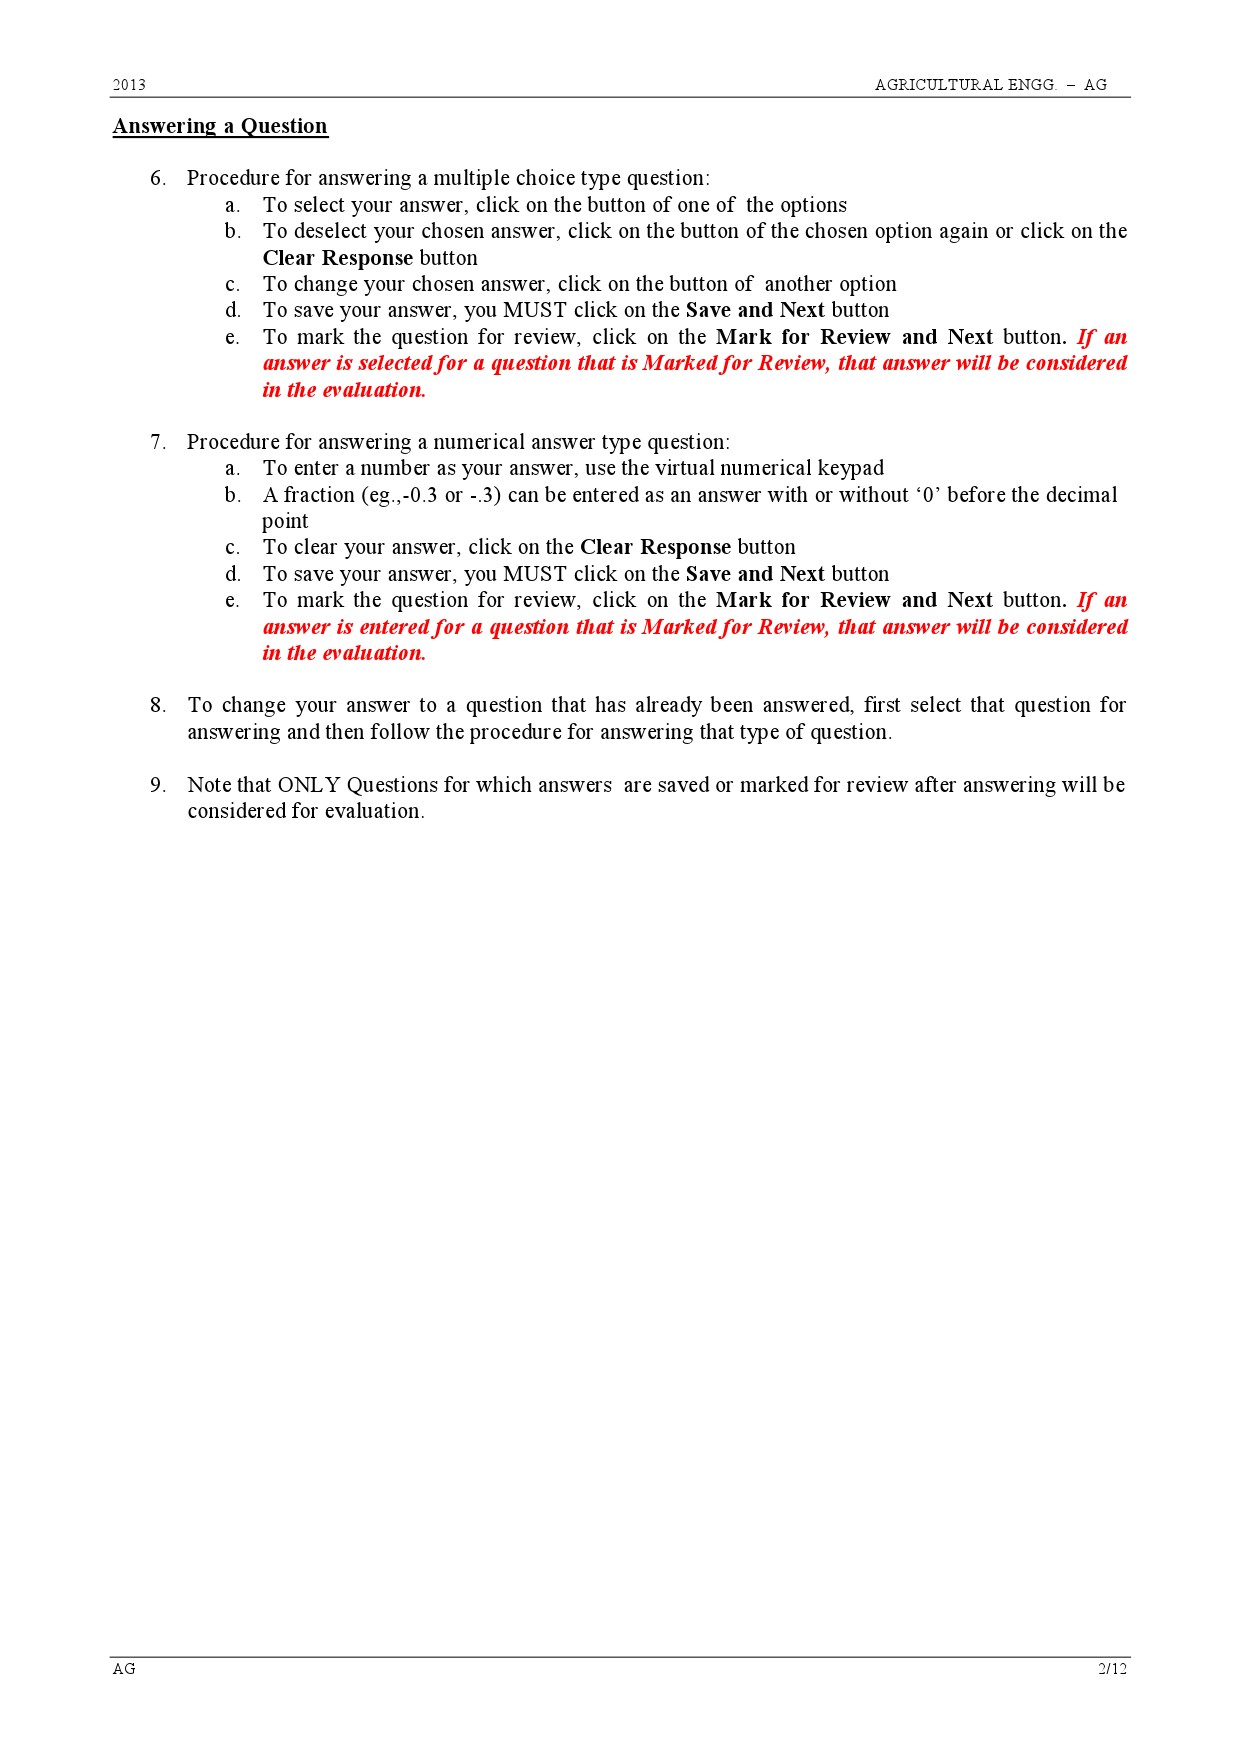 GATE Exam Question Paper 2013 Agricultural Engineering 2